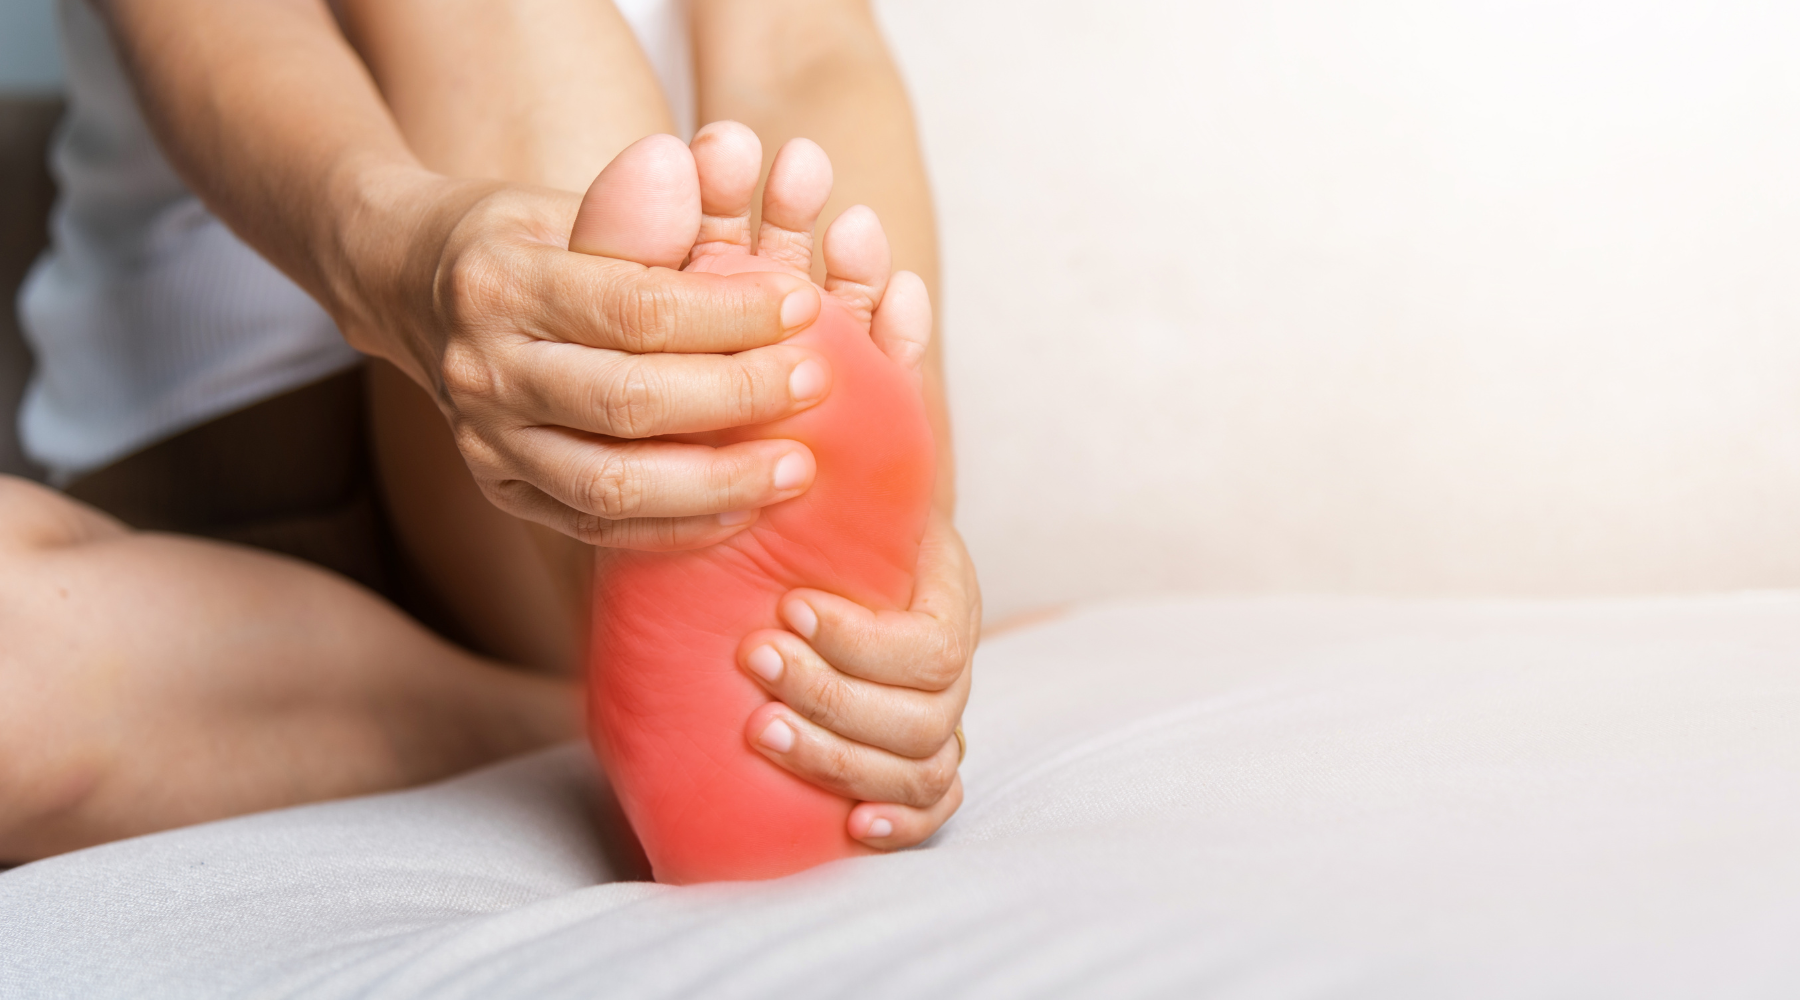 Diabetic Foot Photo: Revealing the Importance of Early Detection